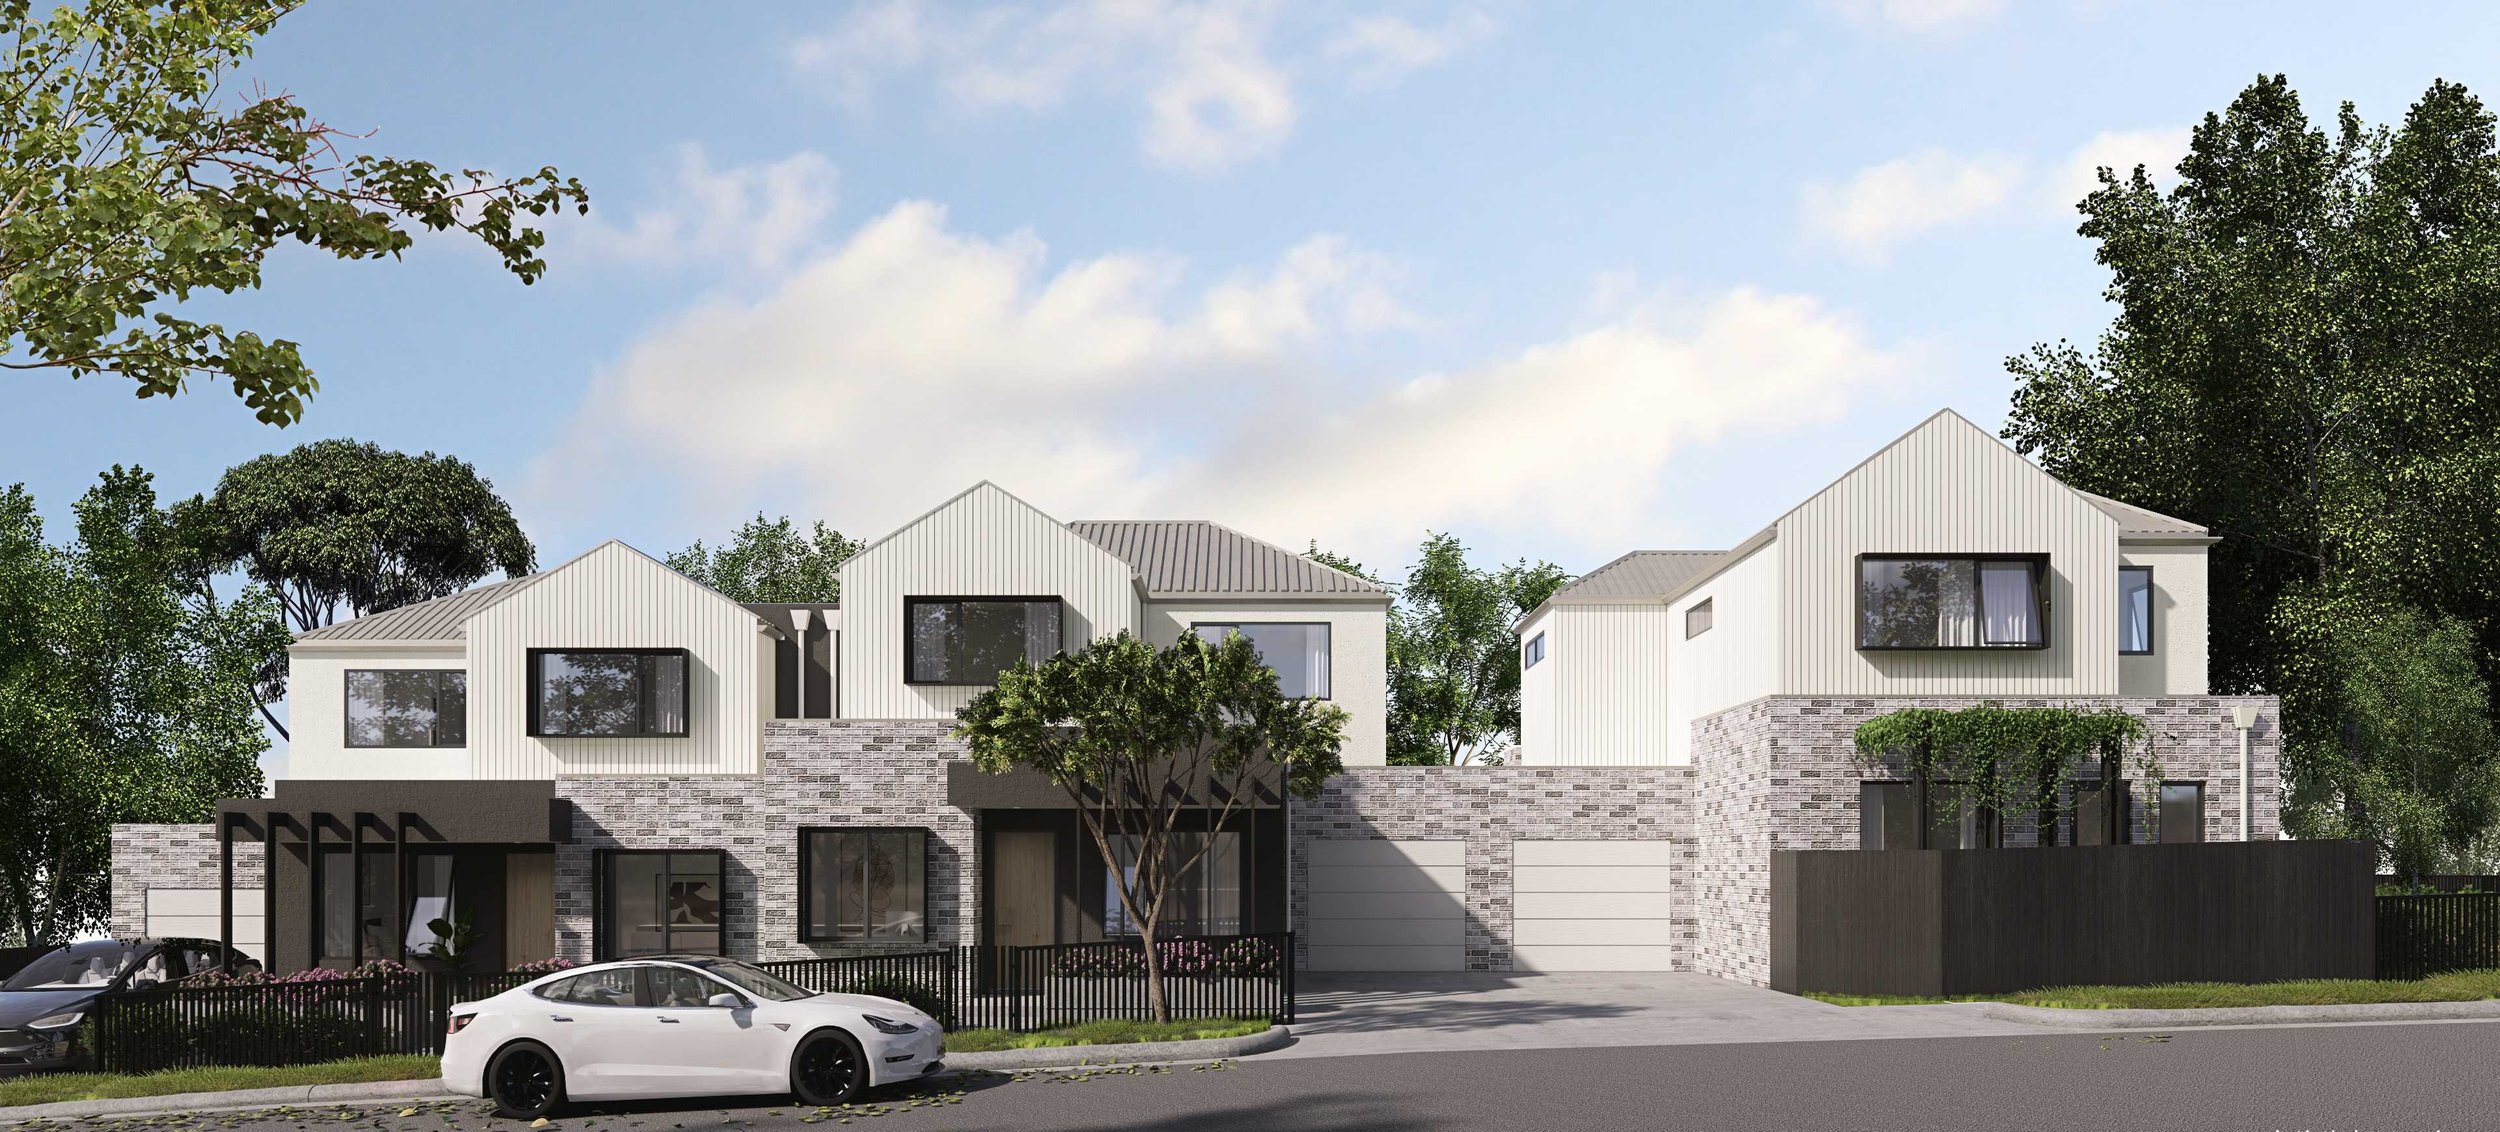 Bentleigh East - 295 East Boundary Road, Bentleigh East, VIC 3165 - Townly - 5.jpg